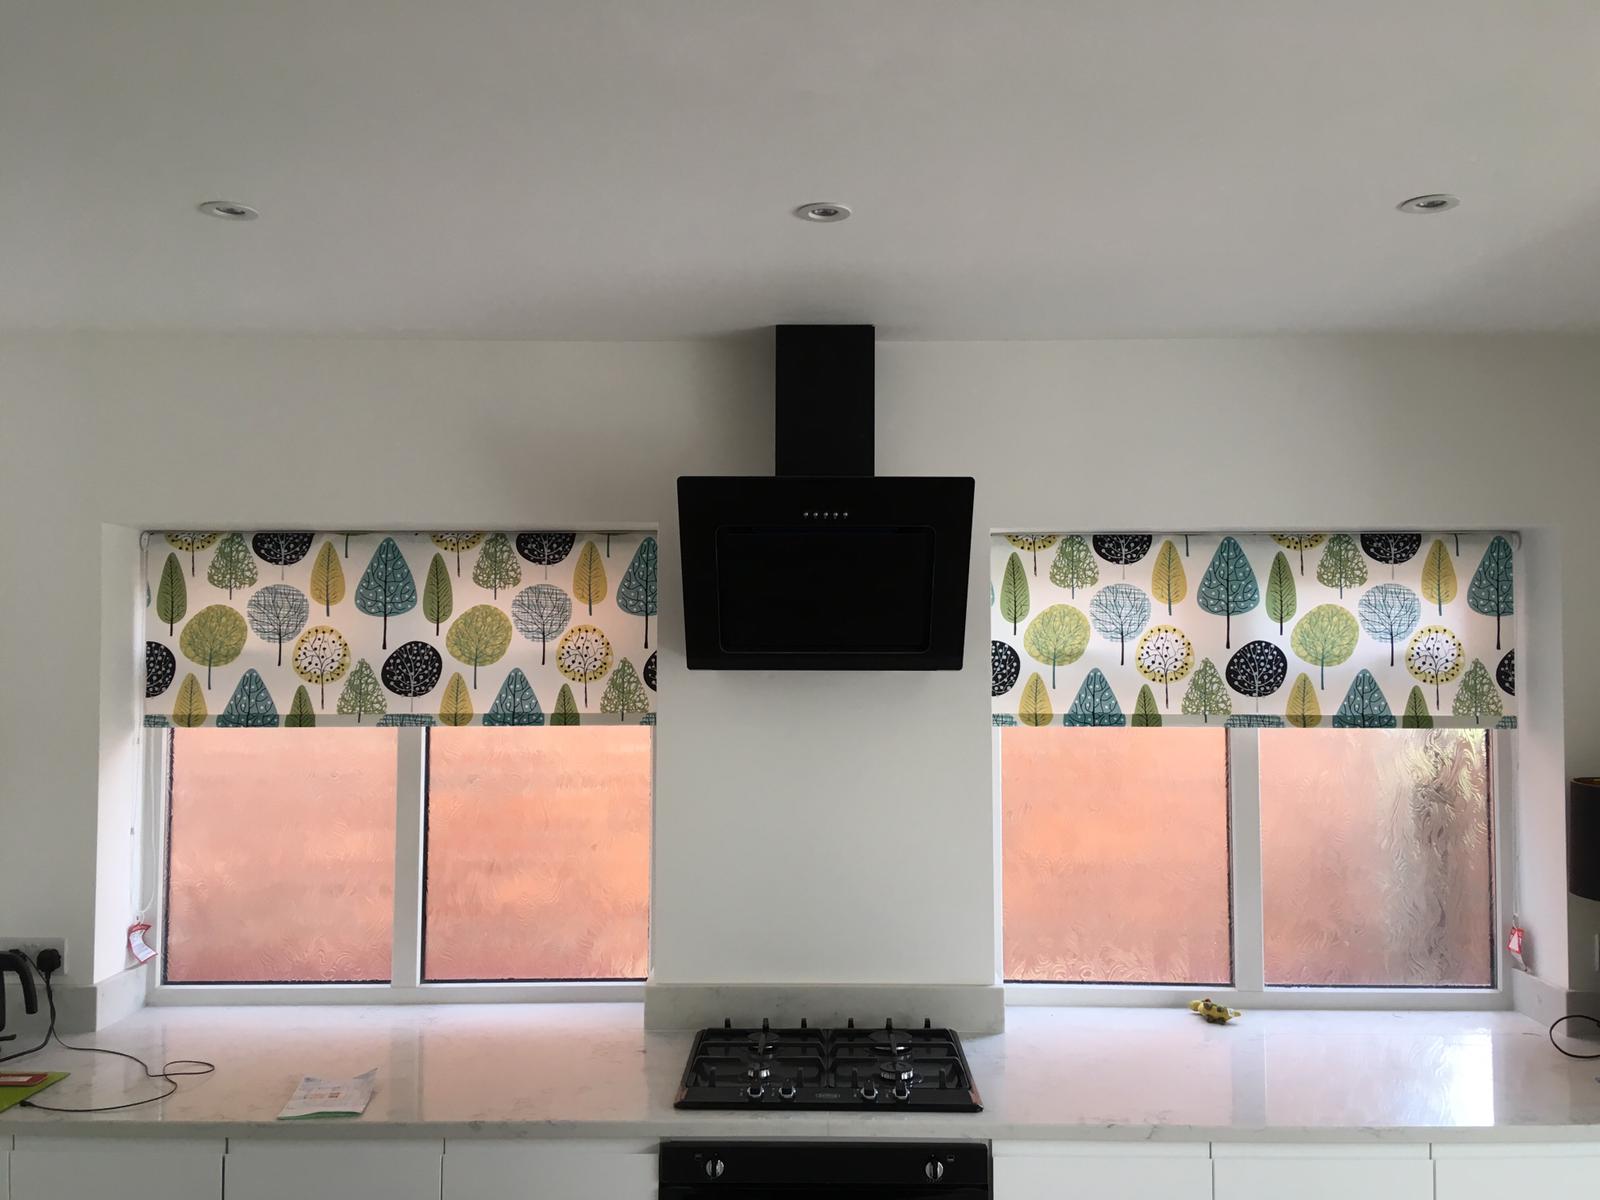 Suppliers of Plain Roller Blinds For Minimalist Decor